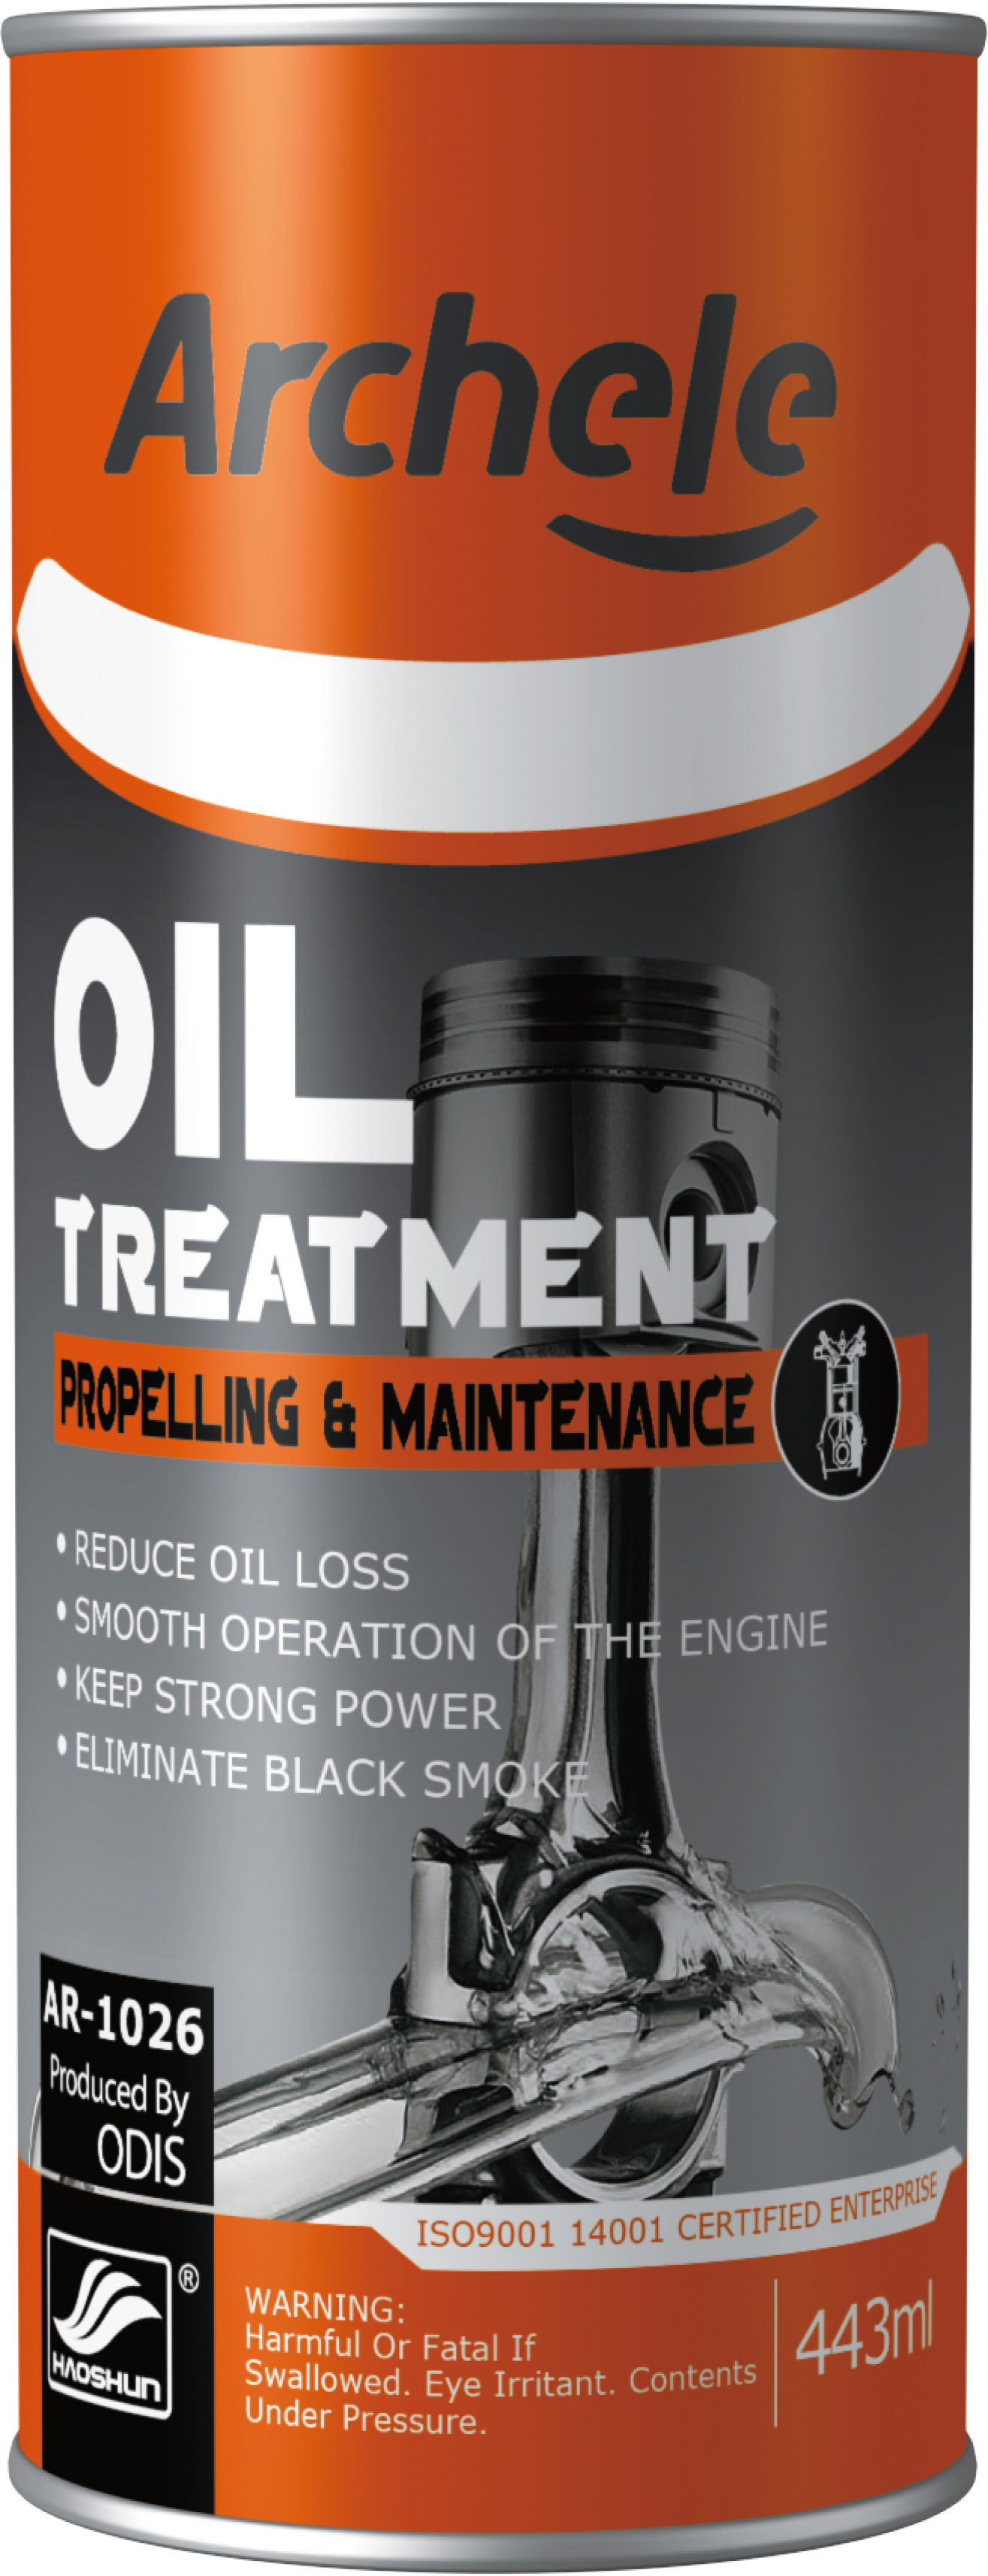 High efficiency car engine Oil Treatment stabilize performance of engine oil accept OEM